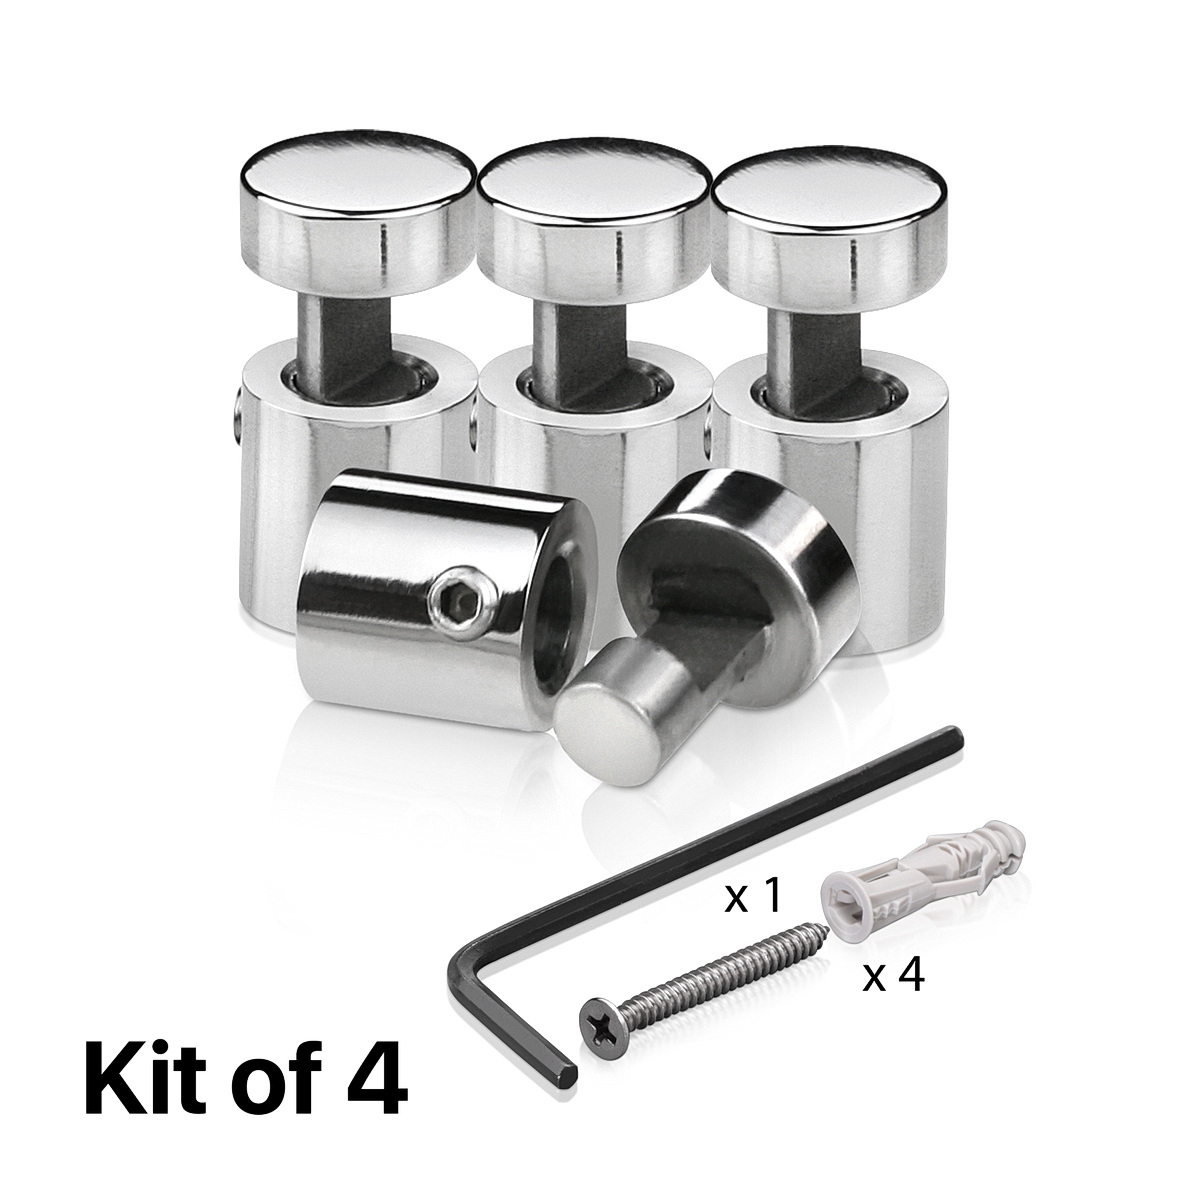 (Set of 4) 1/2'' Diameter X 1/2'' Barrel Length, Stainless Steel Polished Finish. Adjustable Edge Grip Standoff with (4) 2208Z Screw and (4) LANC1 Anchor  for concrete/drywall (For Inside Use Only)